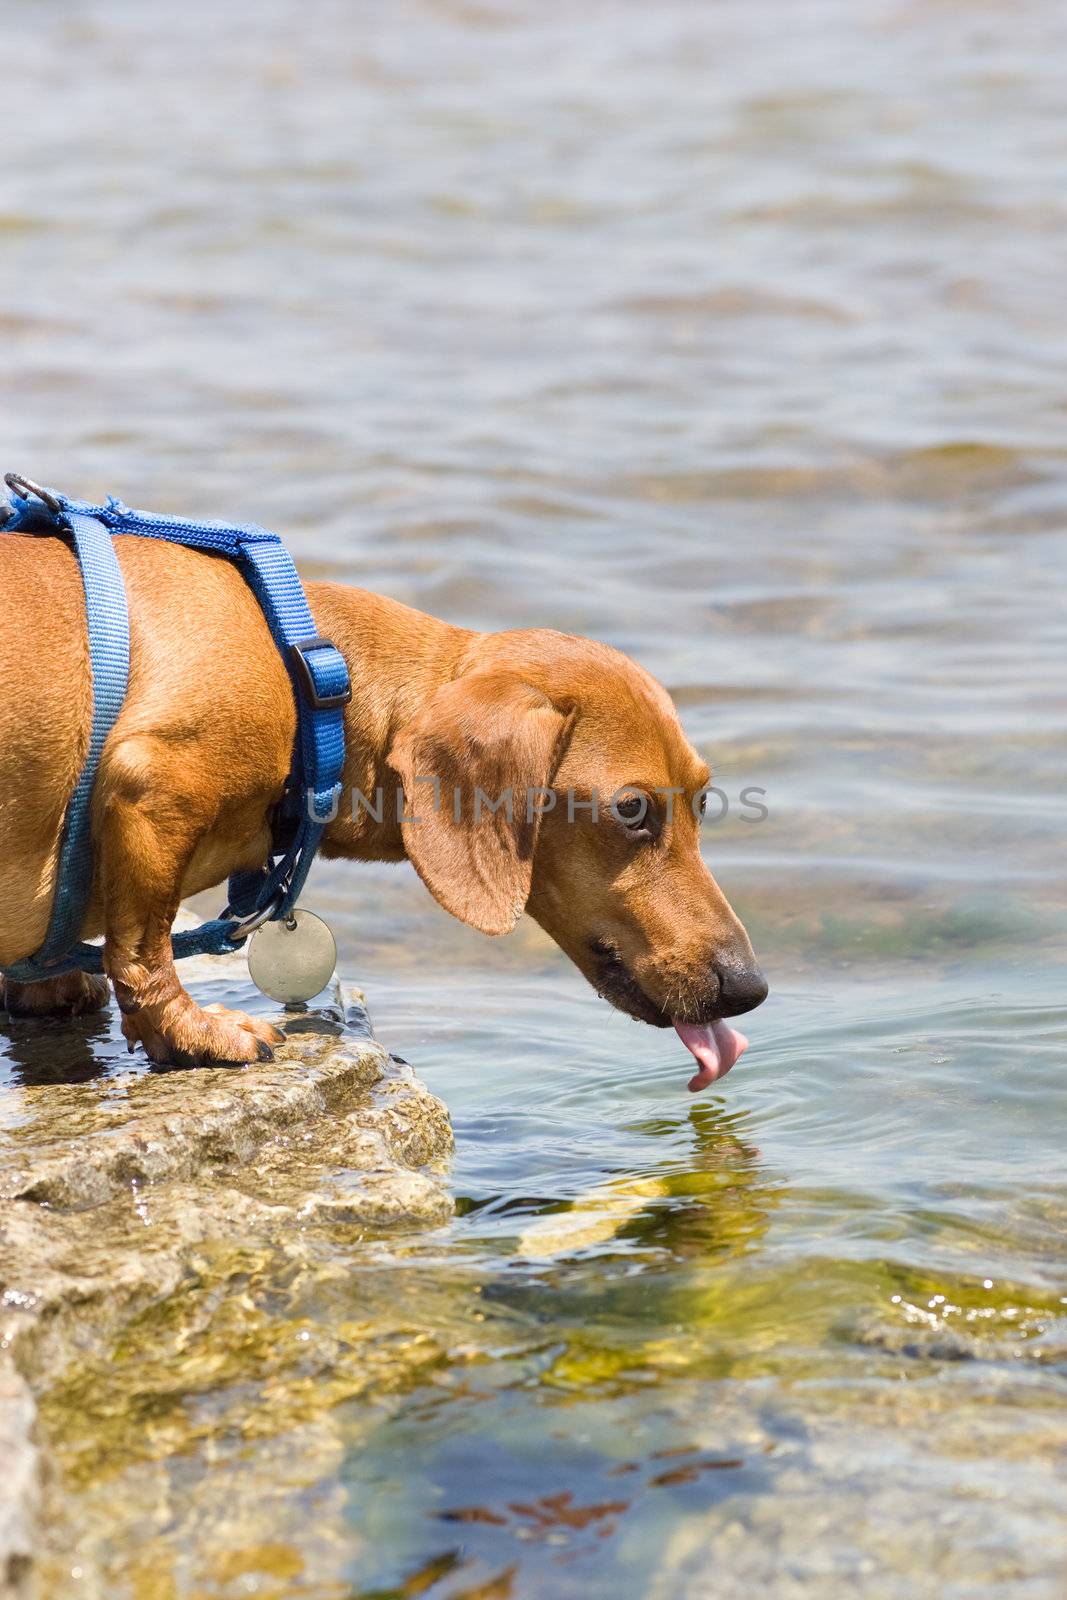 Dachshund takes a drink by woodygraphs